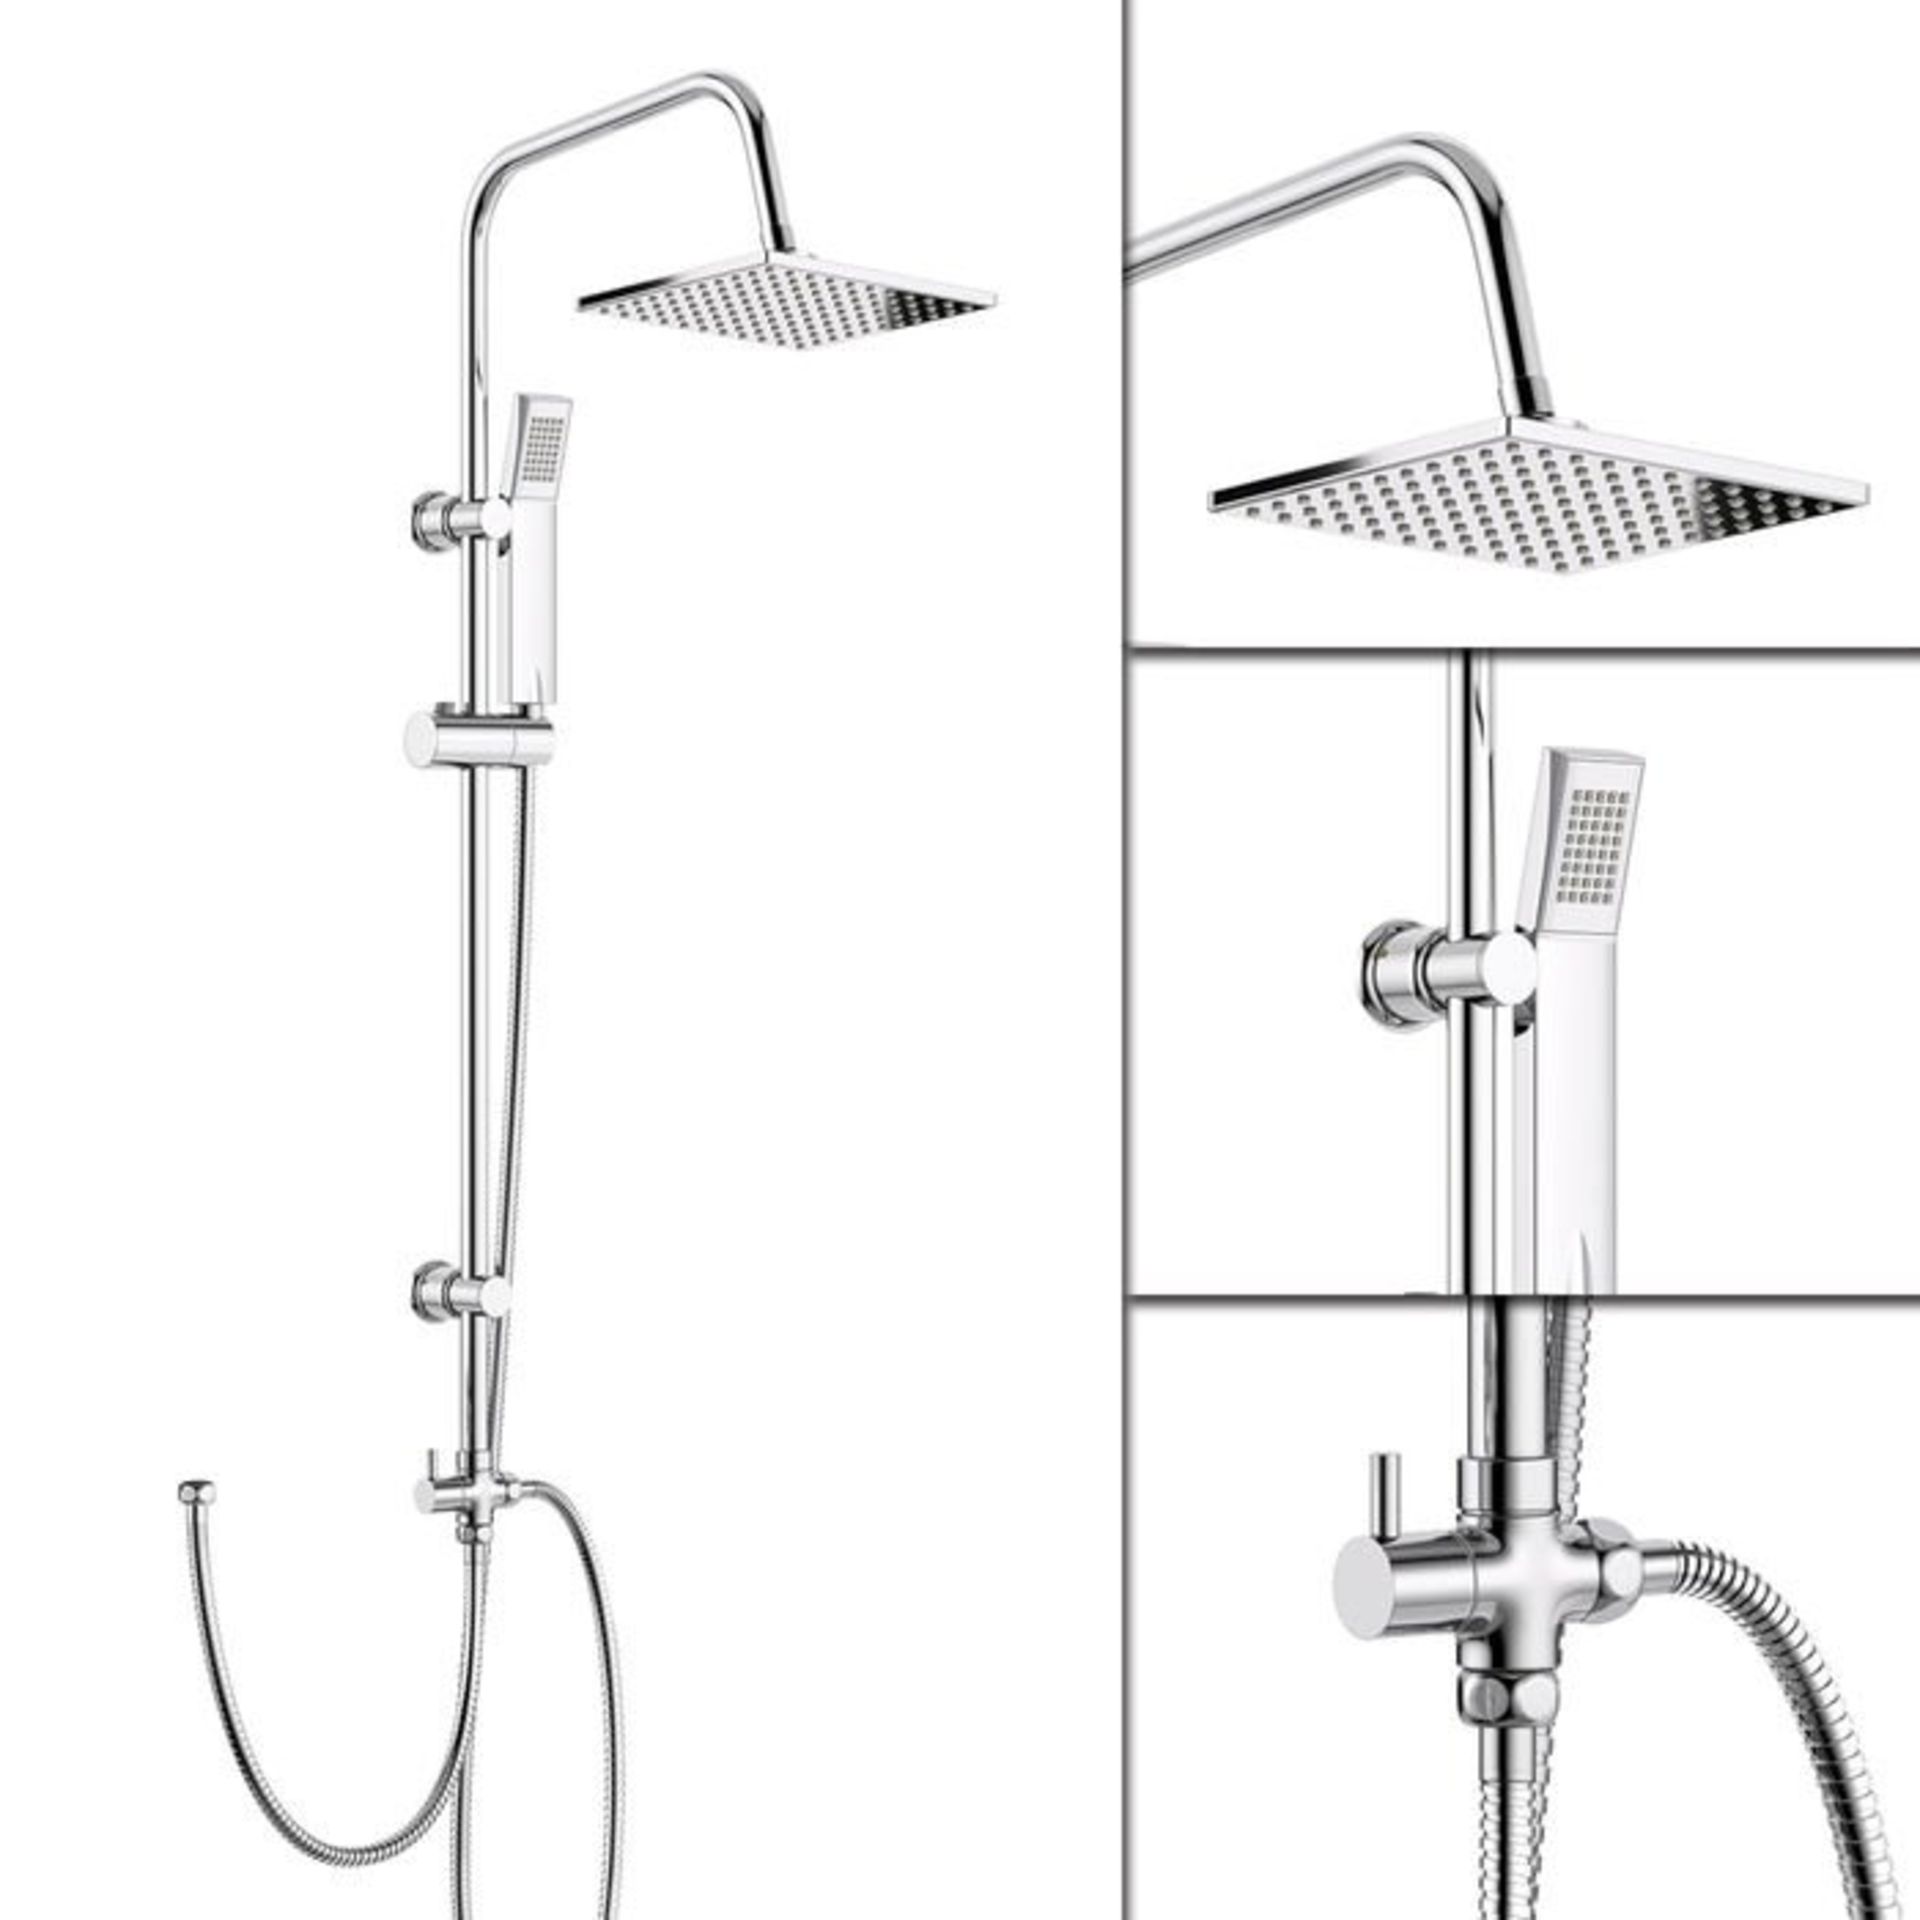 (S180) 200mm Square Head, Riser Rail & Handheld Kit. RRP £249.99. Quality stainless steel shower - Image 2 of 3